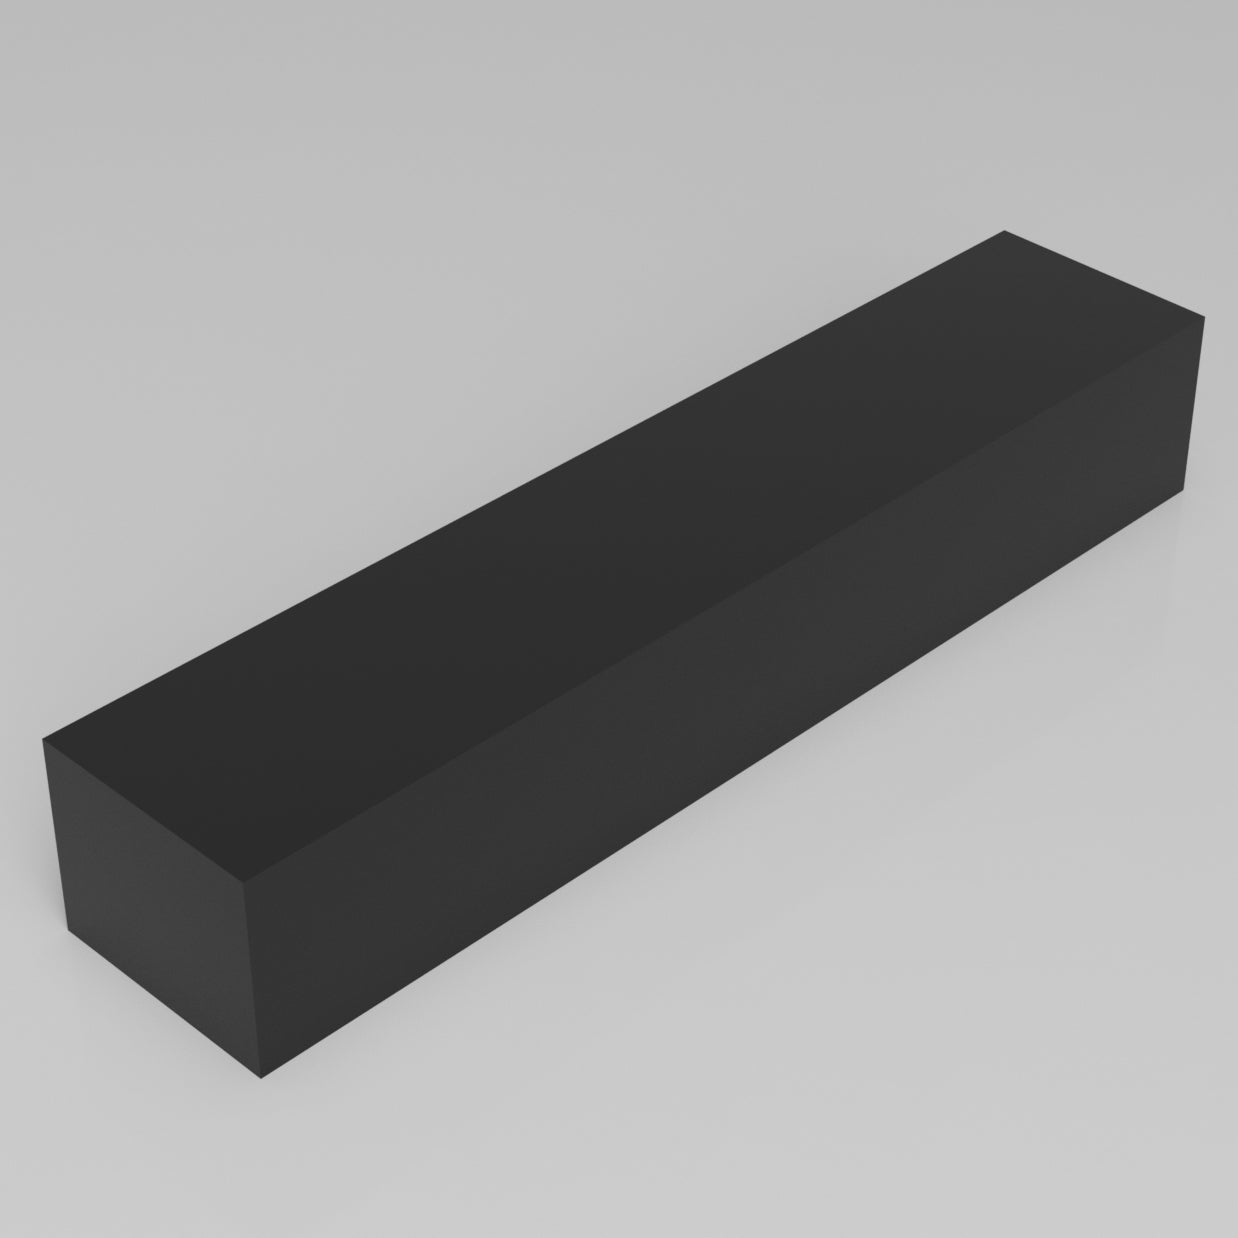 Machinable Wax Rectangular Block Front View 4 Inch by 5 Inch by 24 Inch